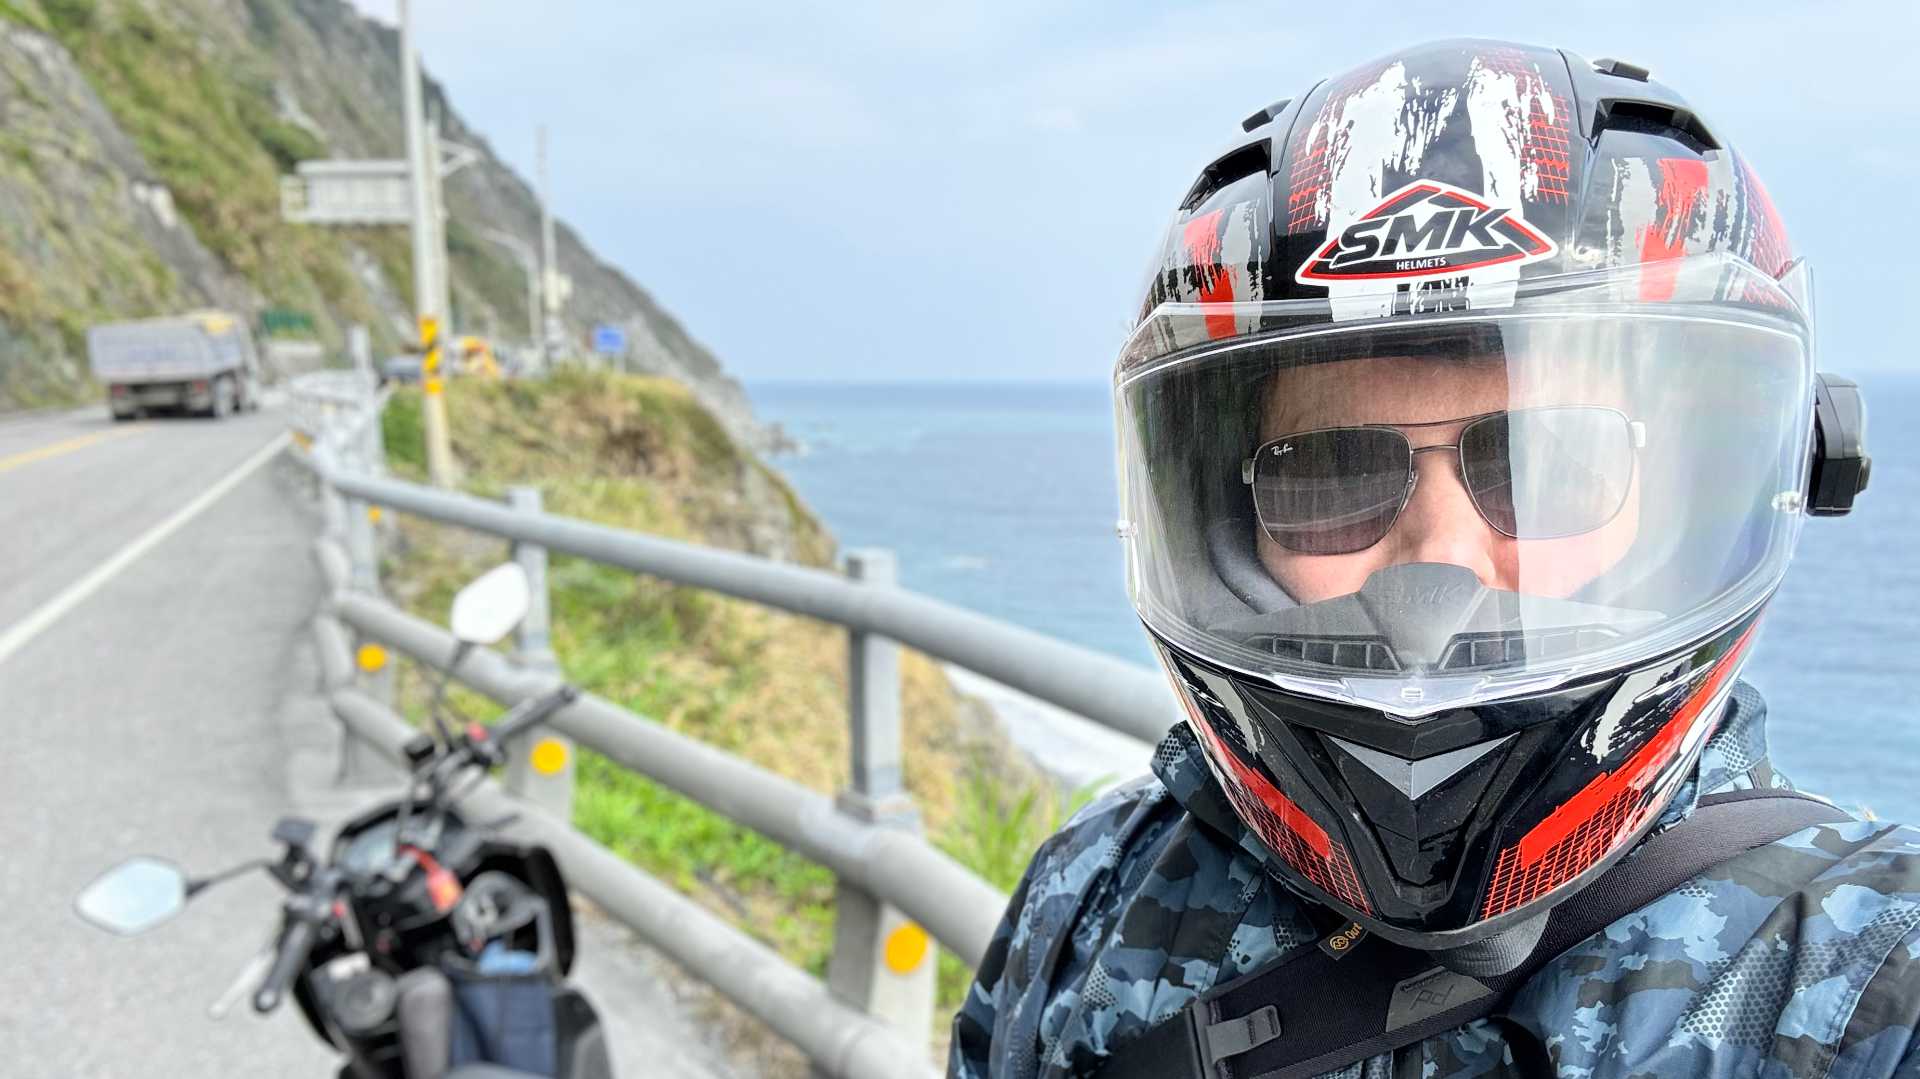 A selfie of the author, Zhen-Kang, in front of a motorcycle, on a two-lane mountain road overlooking the Philippine Sea. Zhen-Kang is wearing sunglasses and a motorcycle helmet.